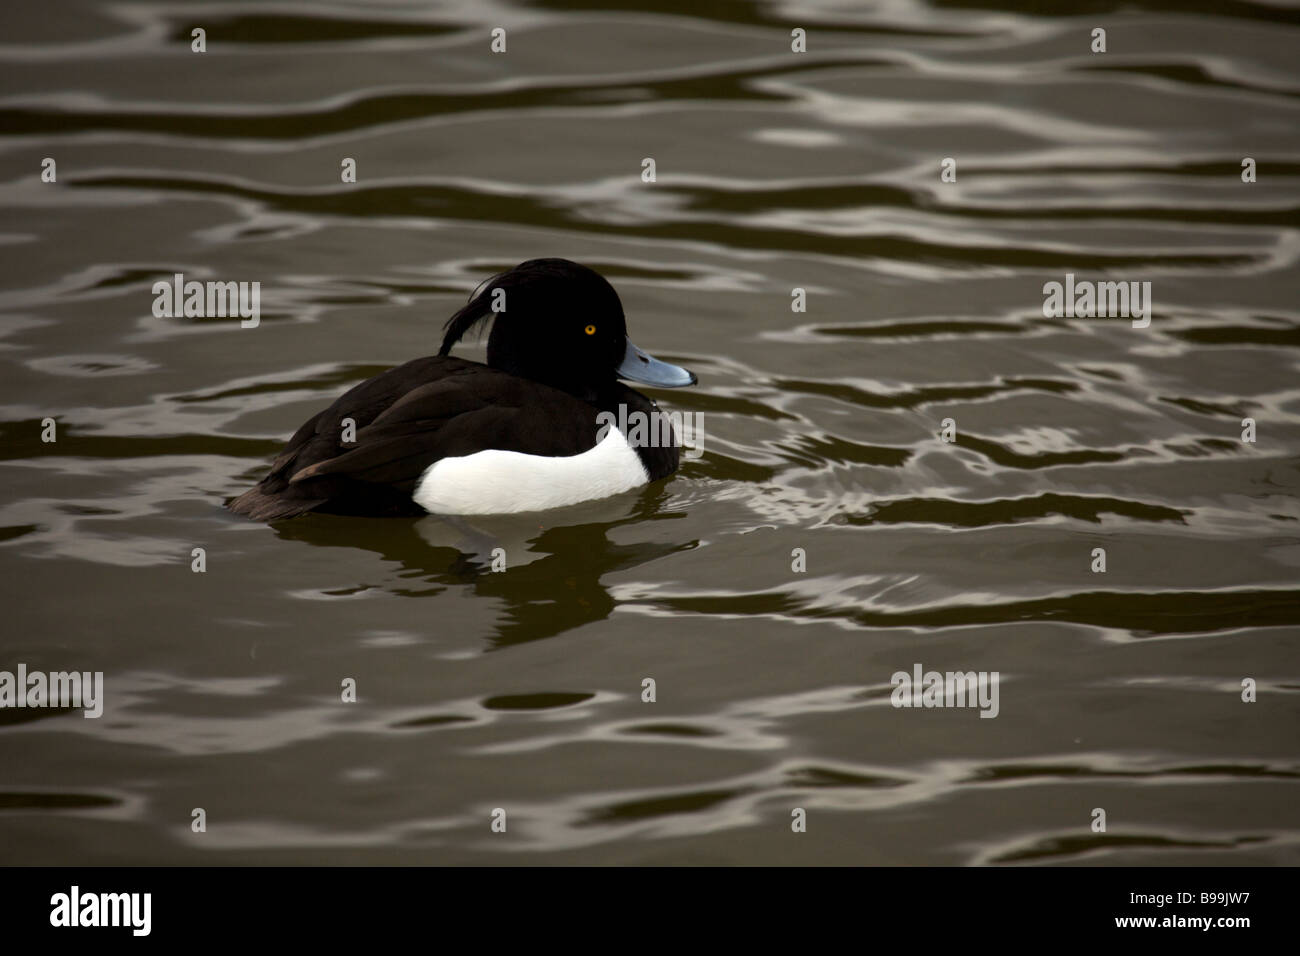 Male Tufted Duck Stock Photo